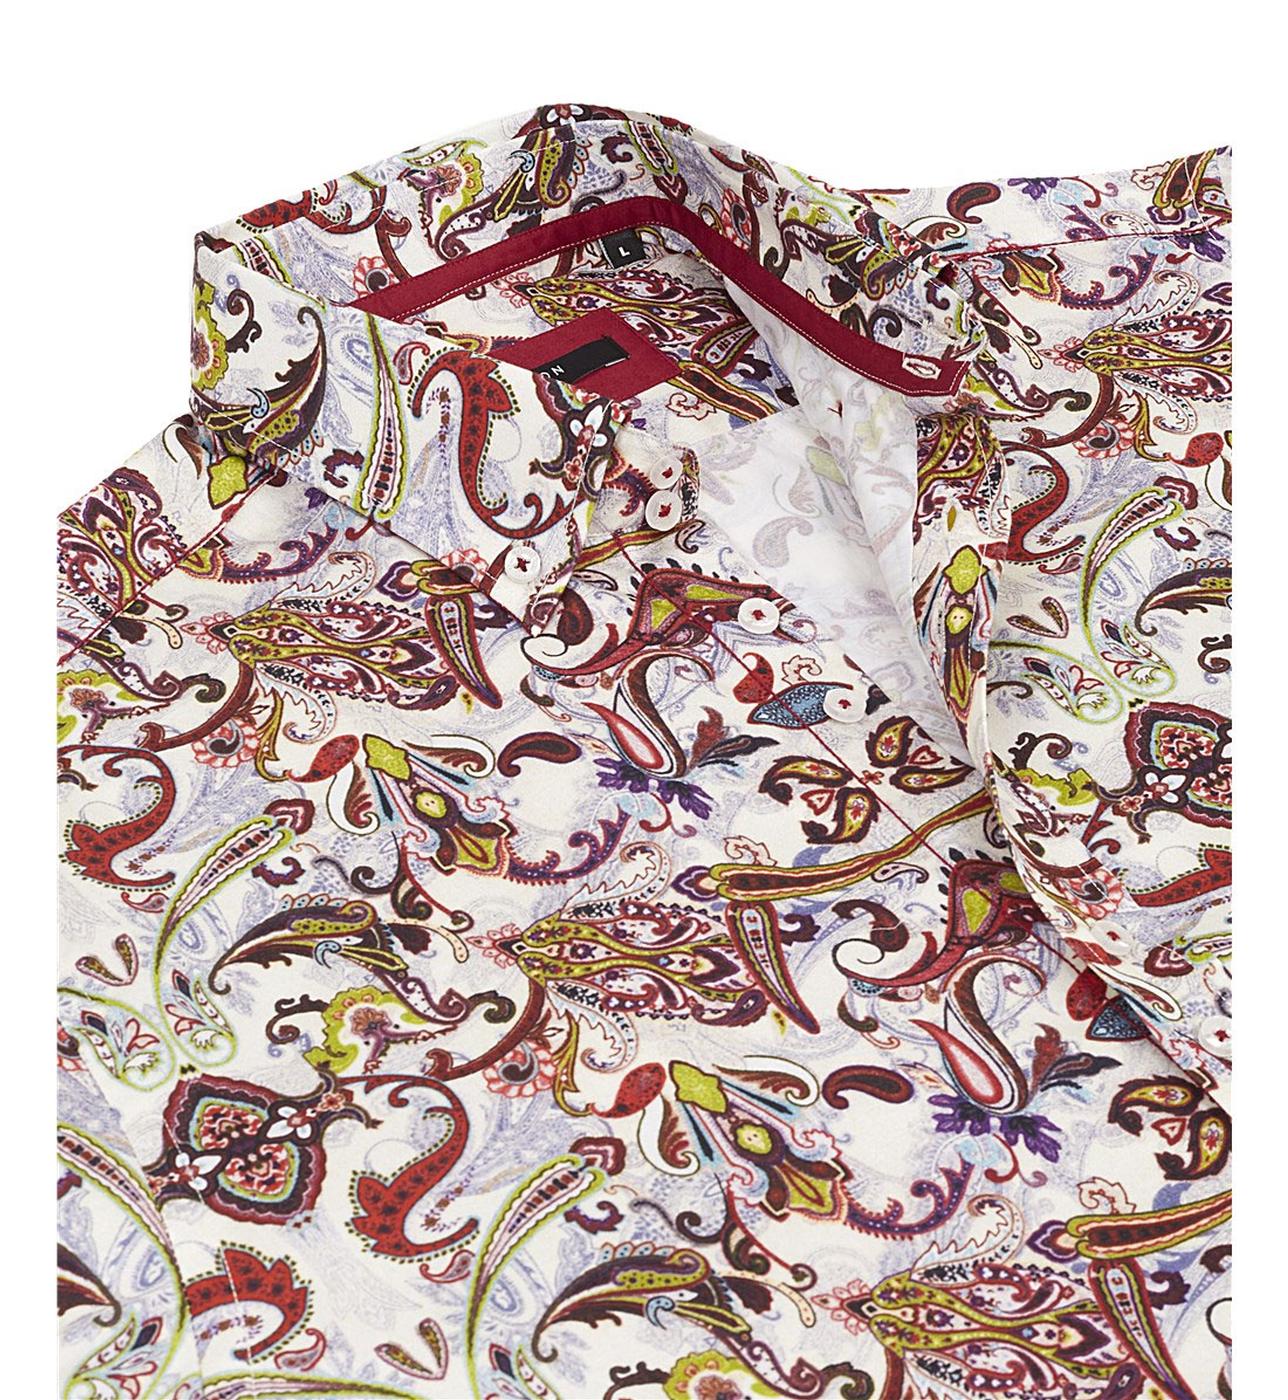 GUIDE LONDON Retro 60s Psychedelic Paisley Mod Dress Shirt